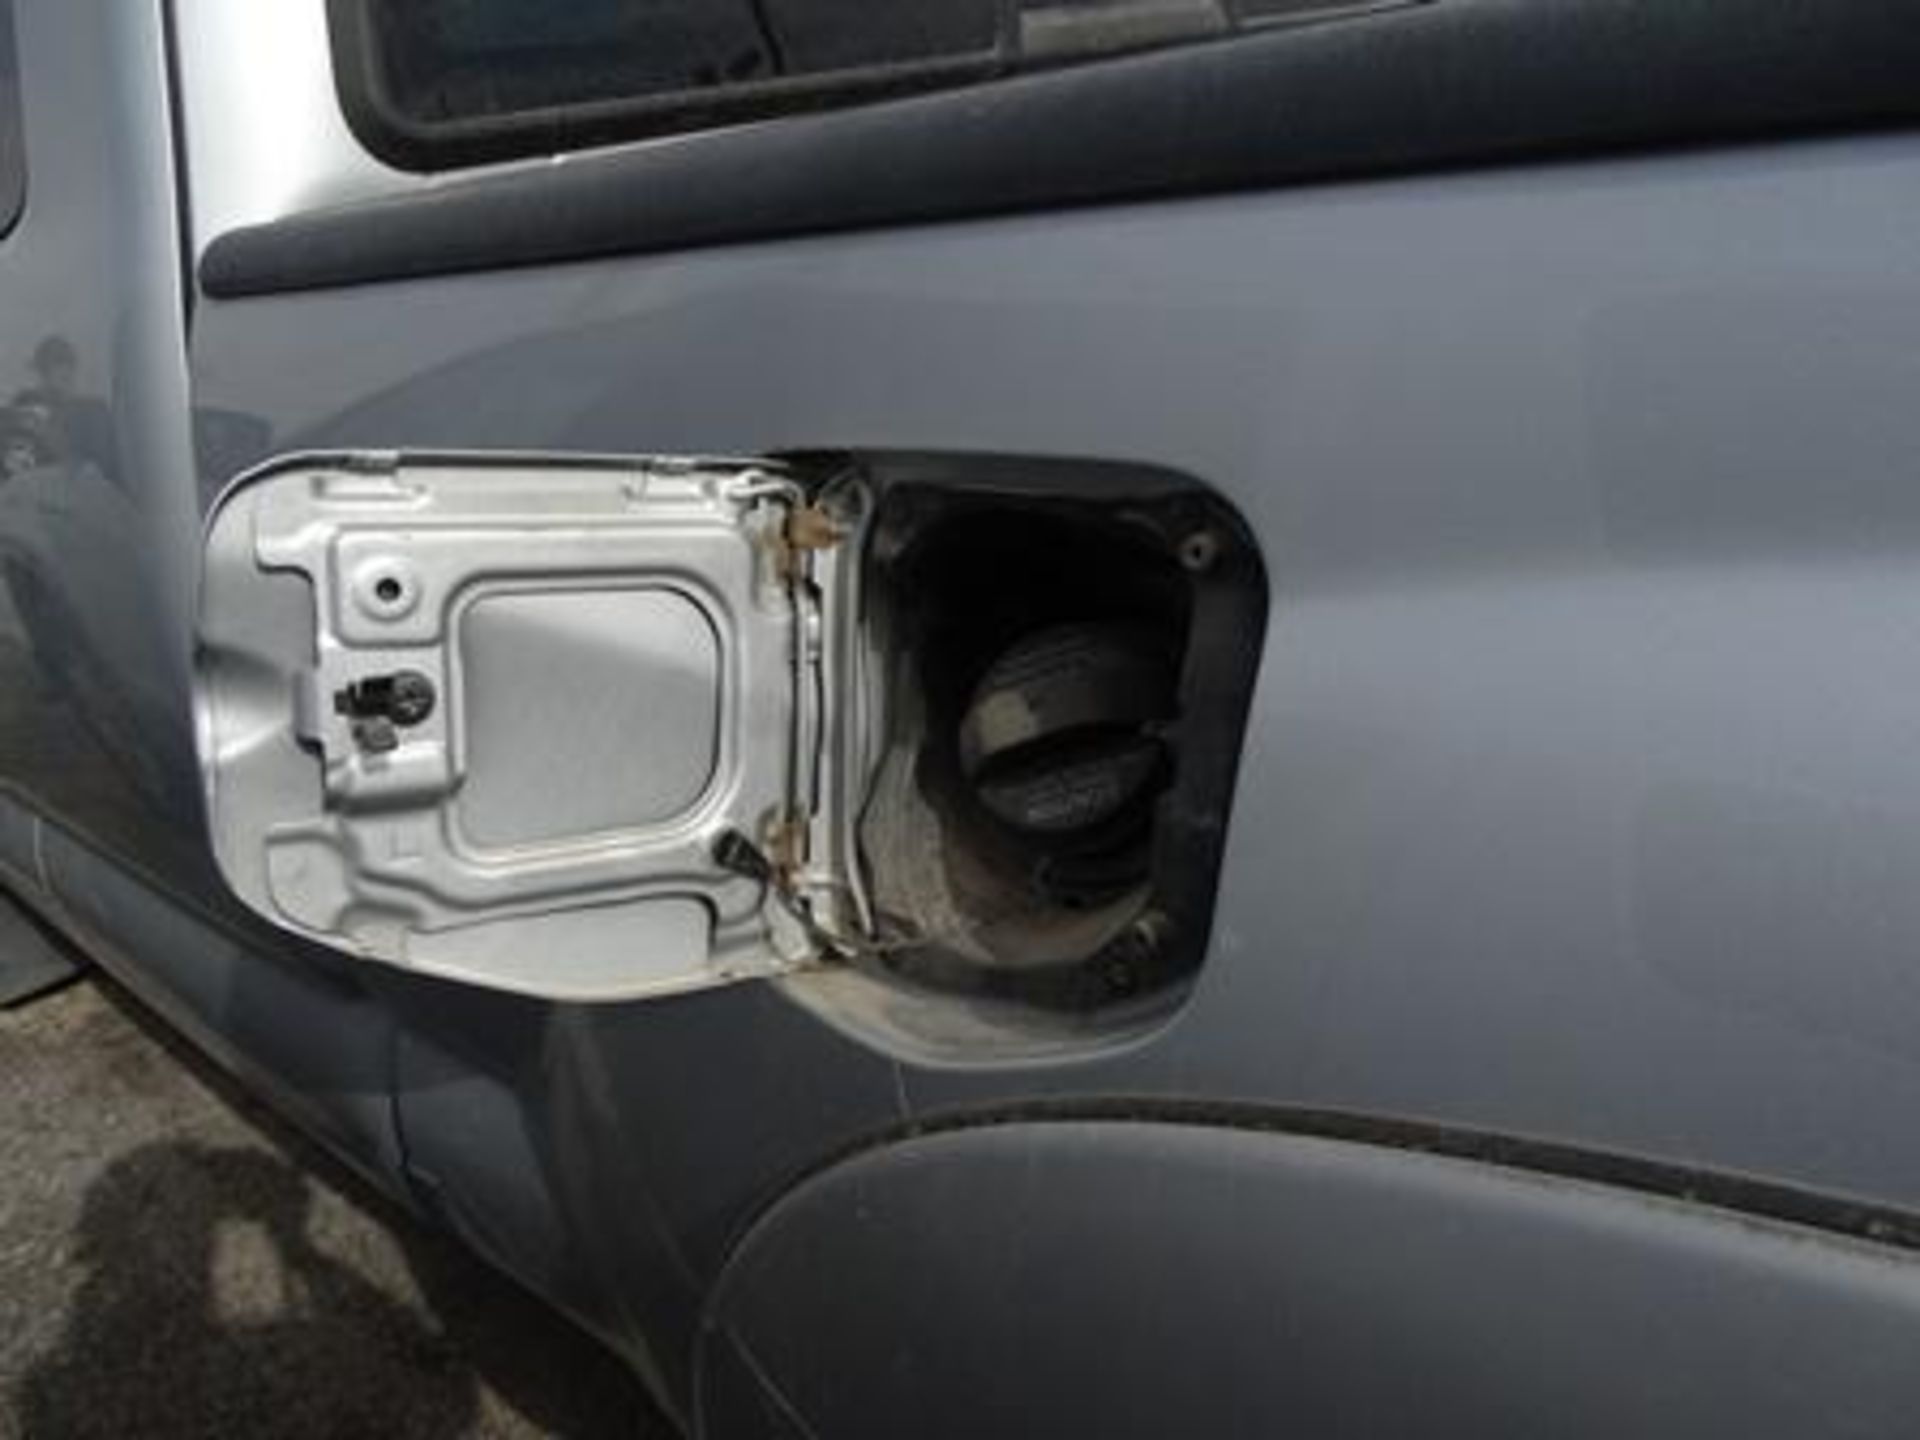 Vehículo Marca Toyota, Linea Tacoma, Tipo Pick Up, Modelo 2007, Color Gris, Located In: Chihuahua, - Bild 13 aus 19